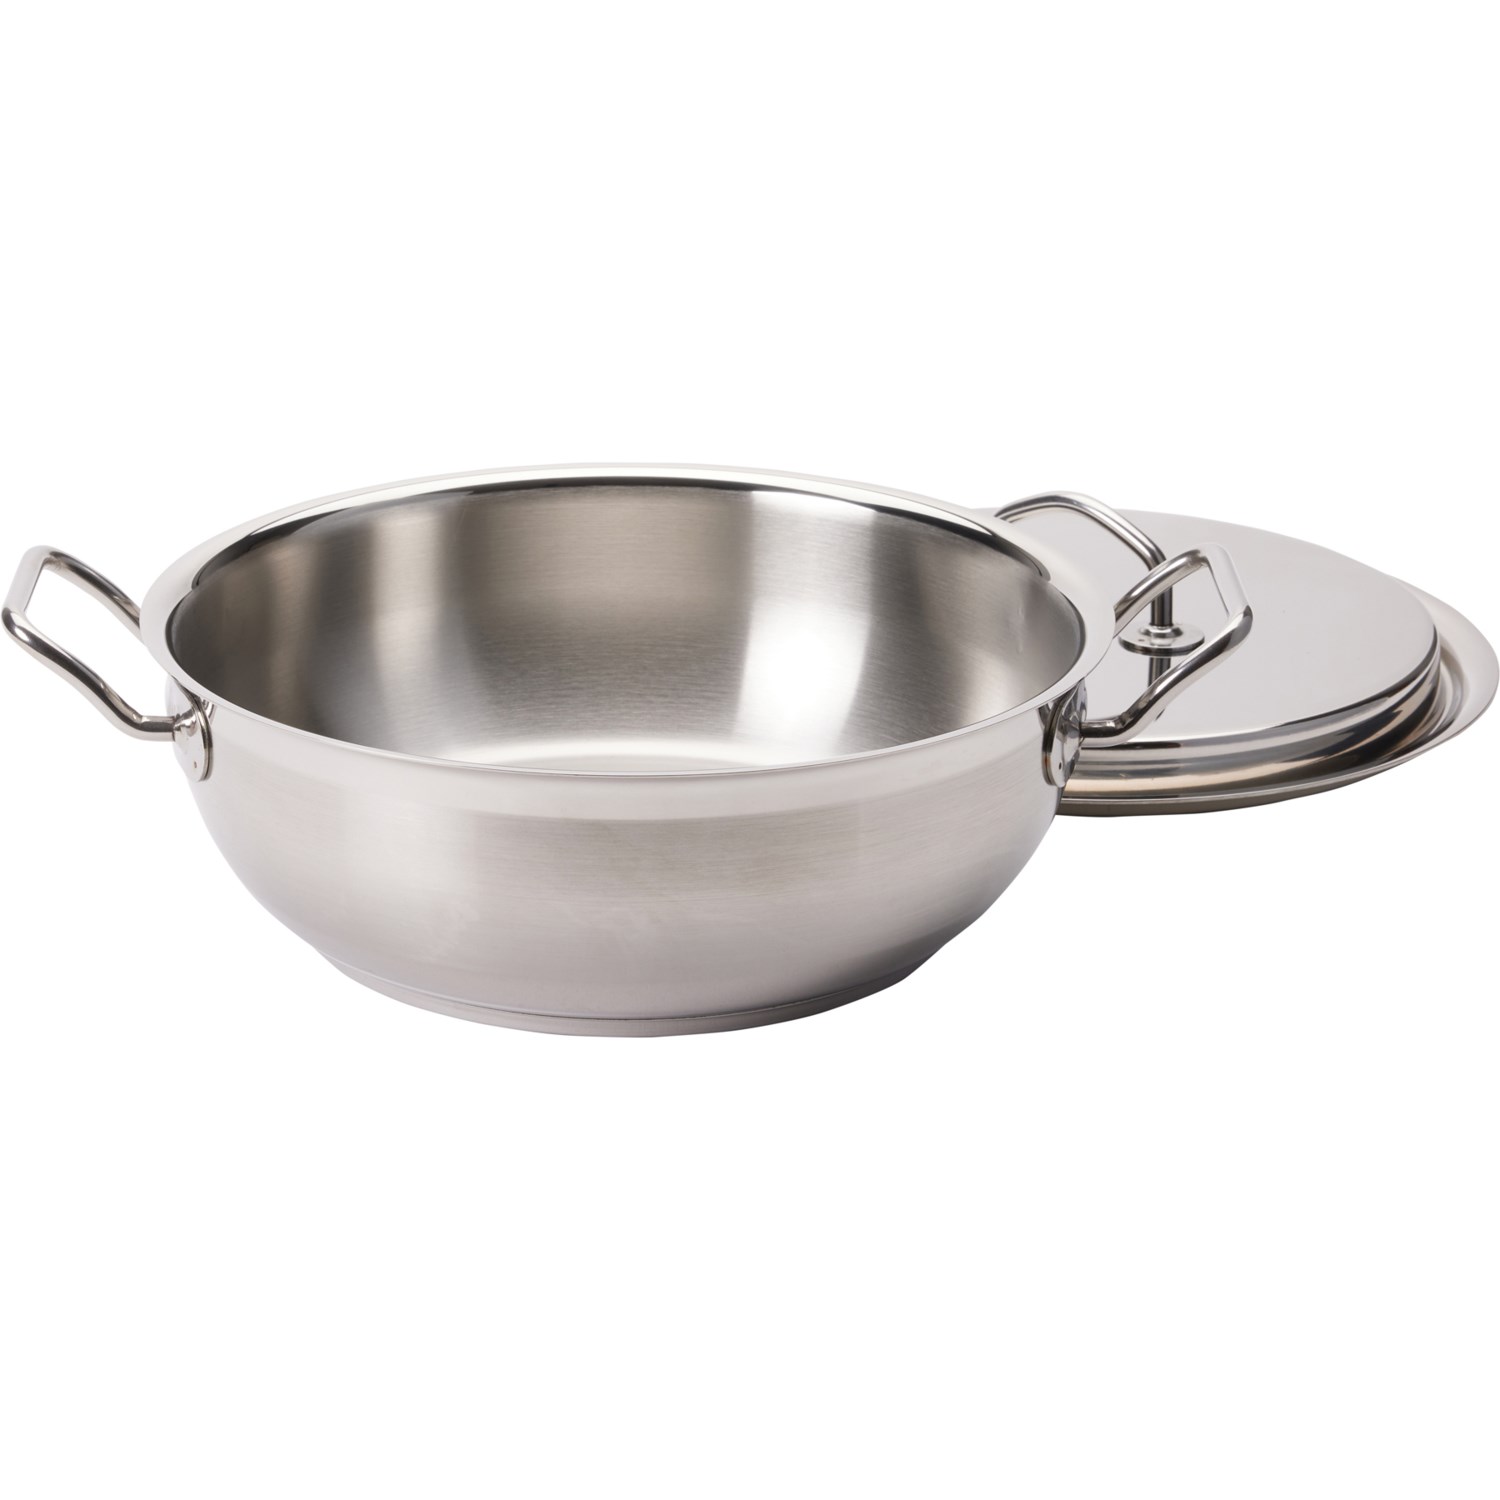 Silga Milano Made in Italy Teknika® Casserole Pan with Lid - 8 qt. - Save  30%